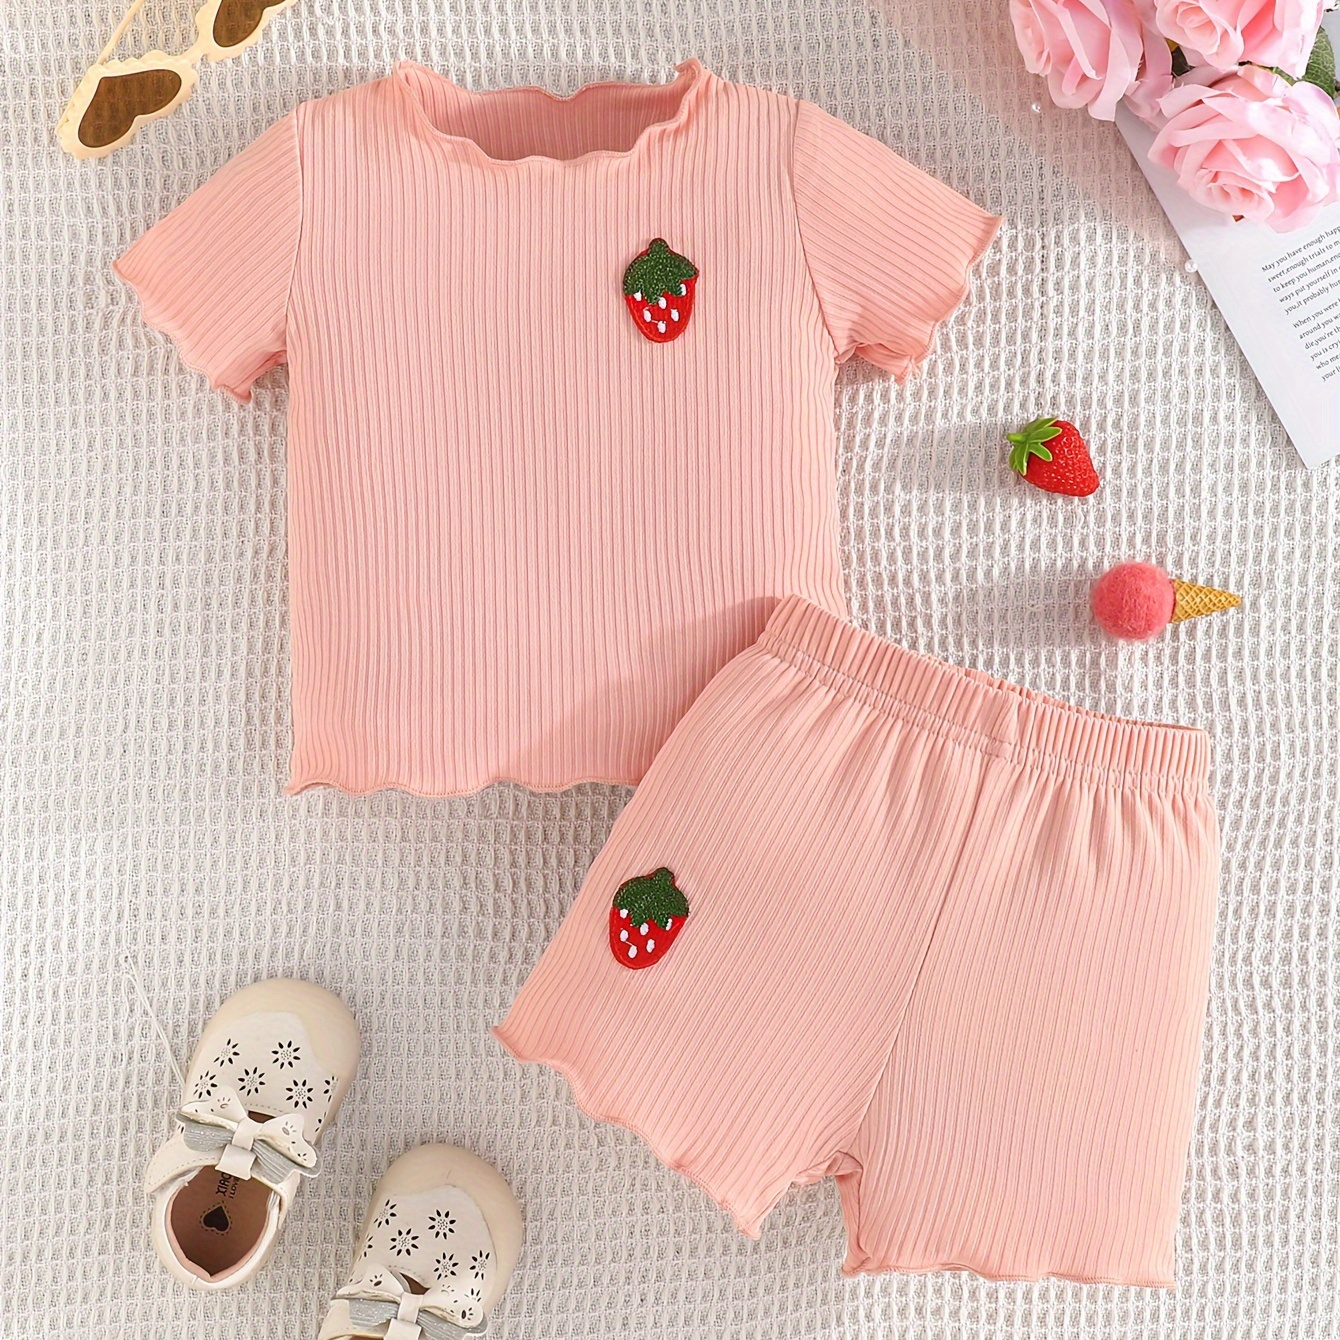 

Baby's Cute Strawberry Patchwork 2pcs Summer Outfit, Ribbed T-shirt & Shorts Set, Toddler & Infant Girl's Clothes For Daily Wear/holiday/party